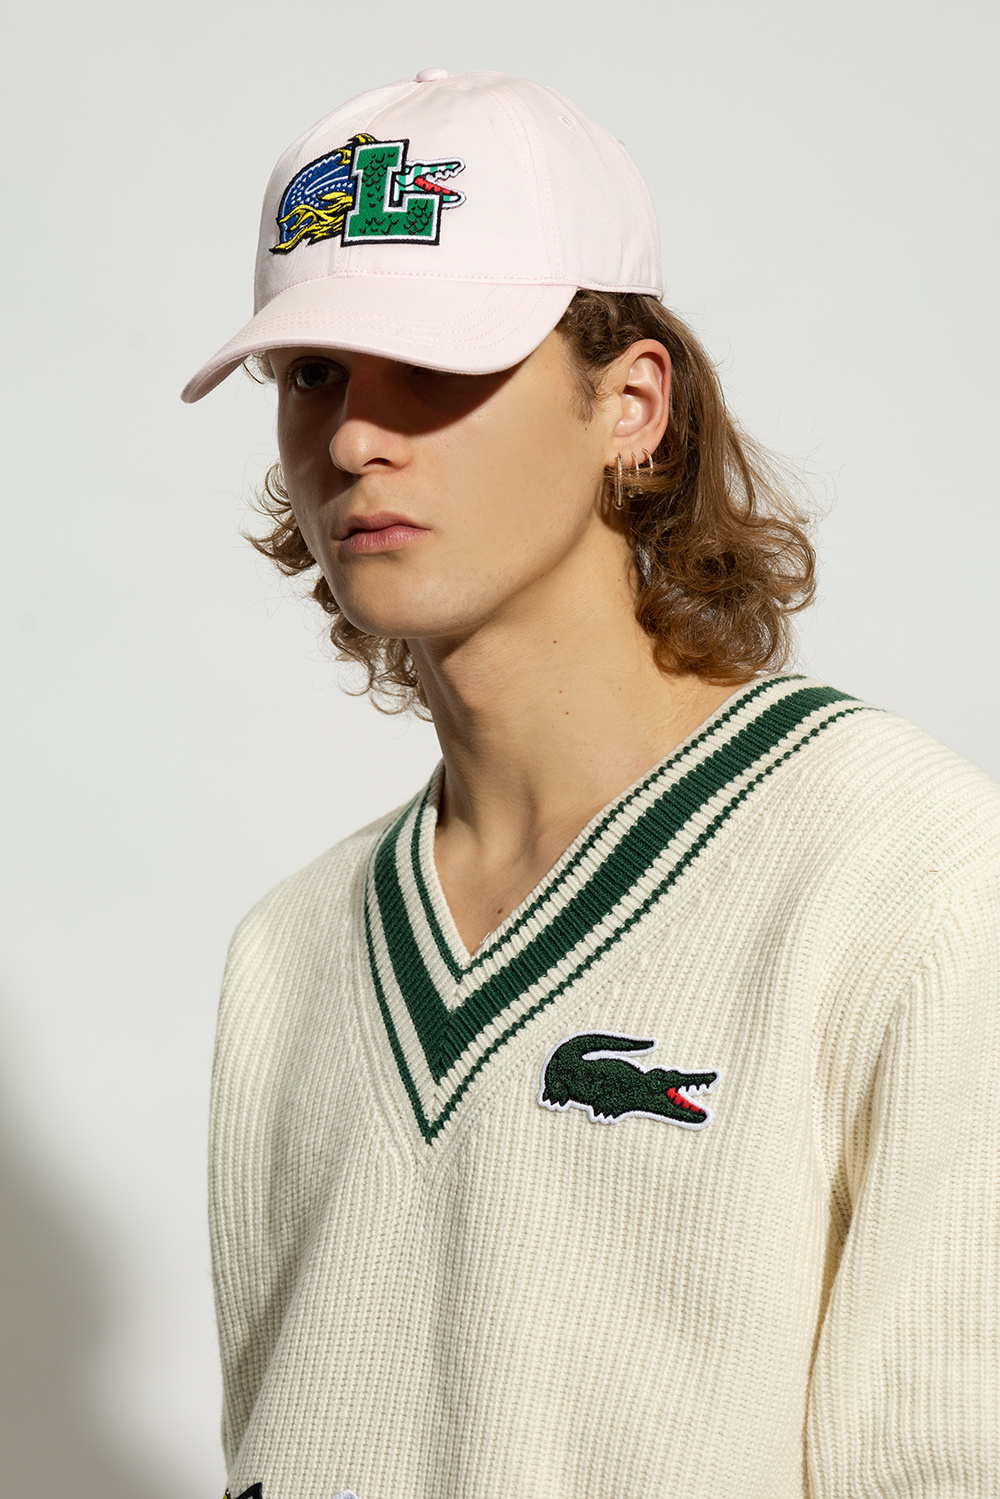 logo Lacoste atmos Pink Lacoste new Cap Serve Serve collaborated with IetpShops - a with collection on Japan and -